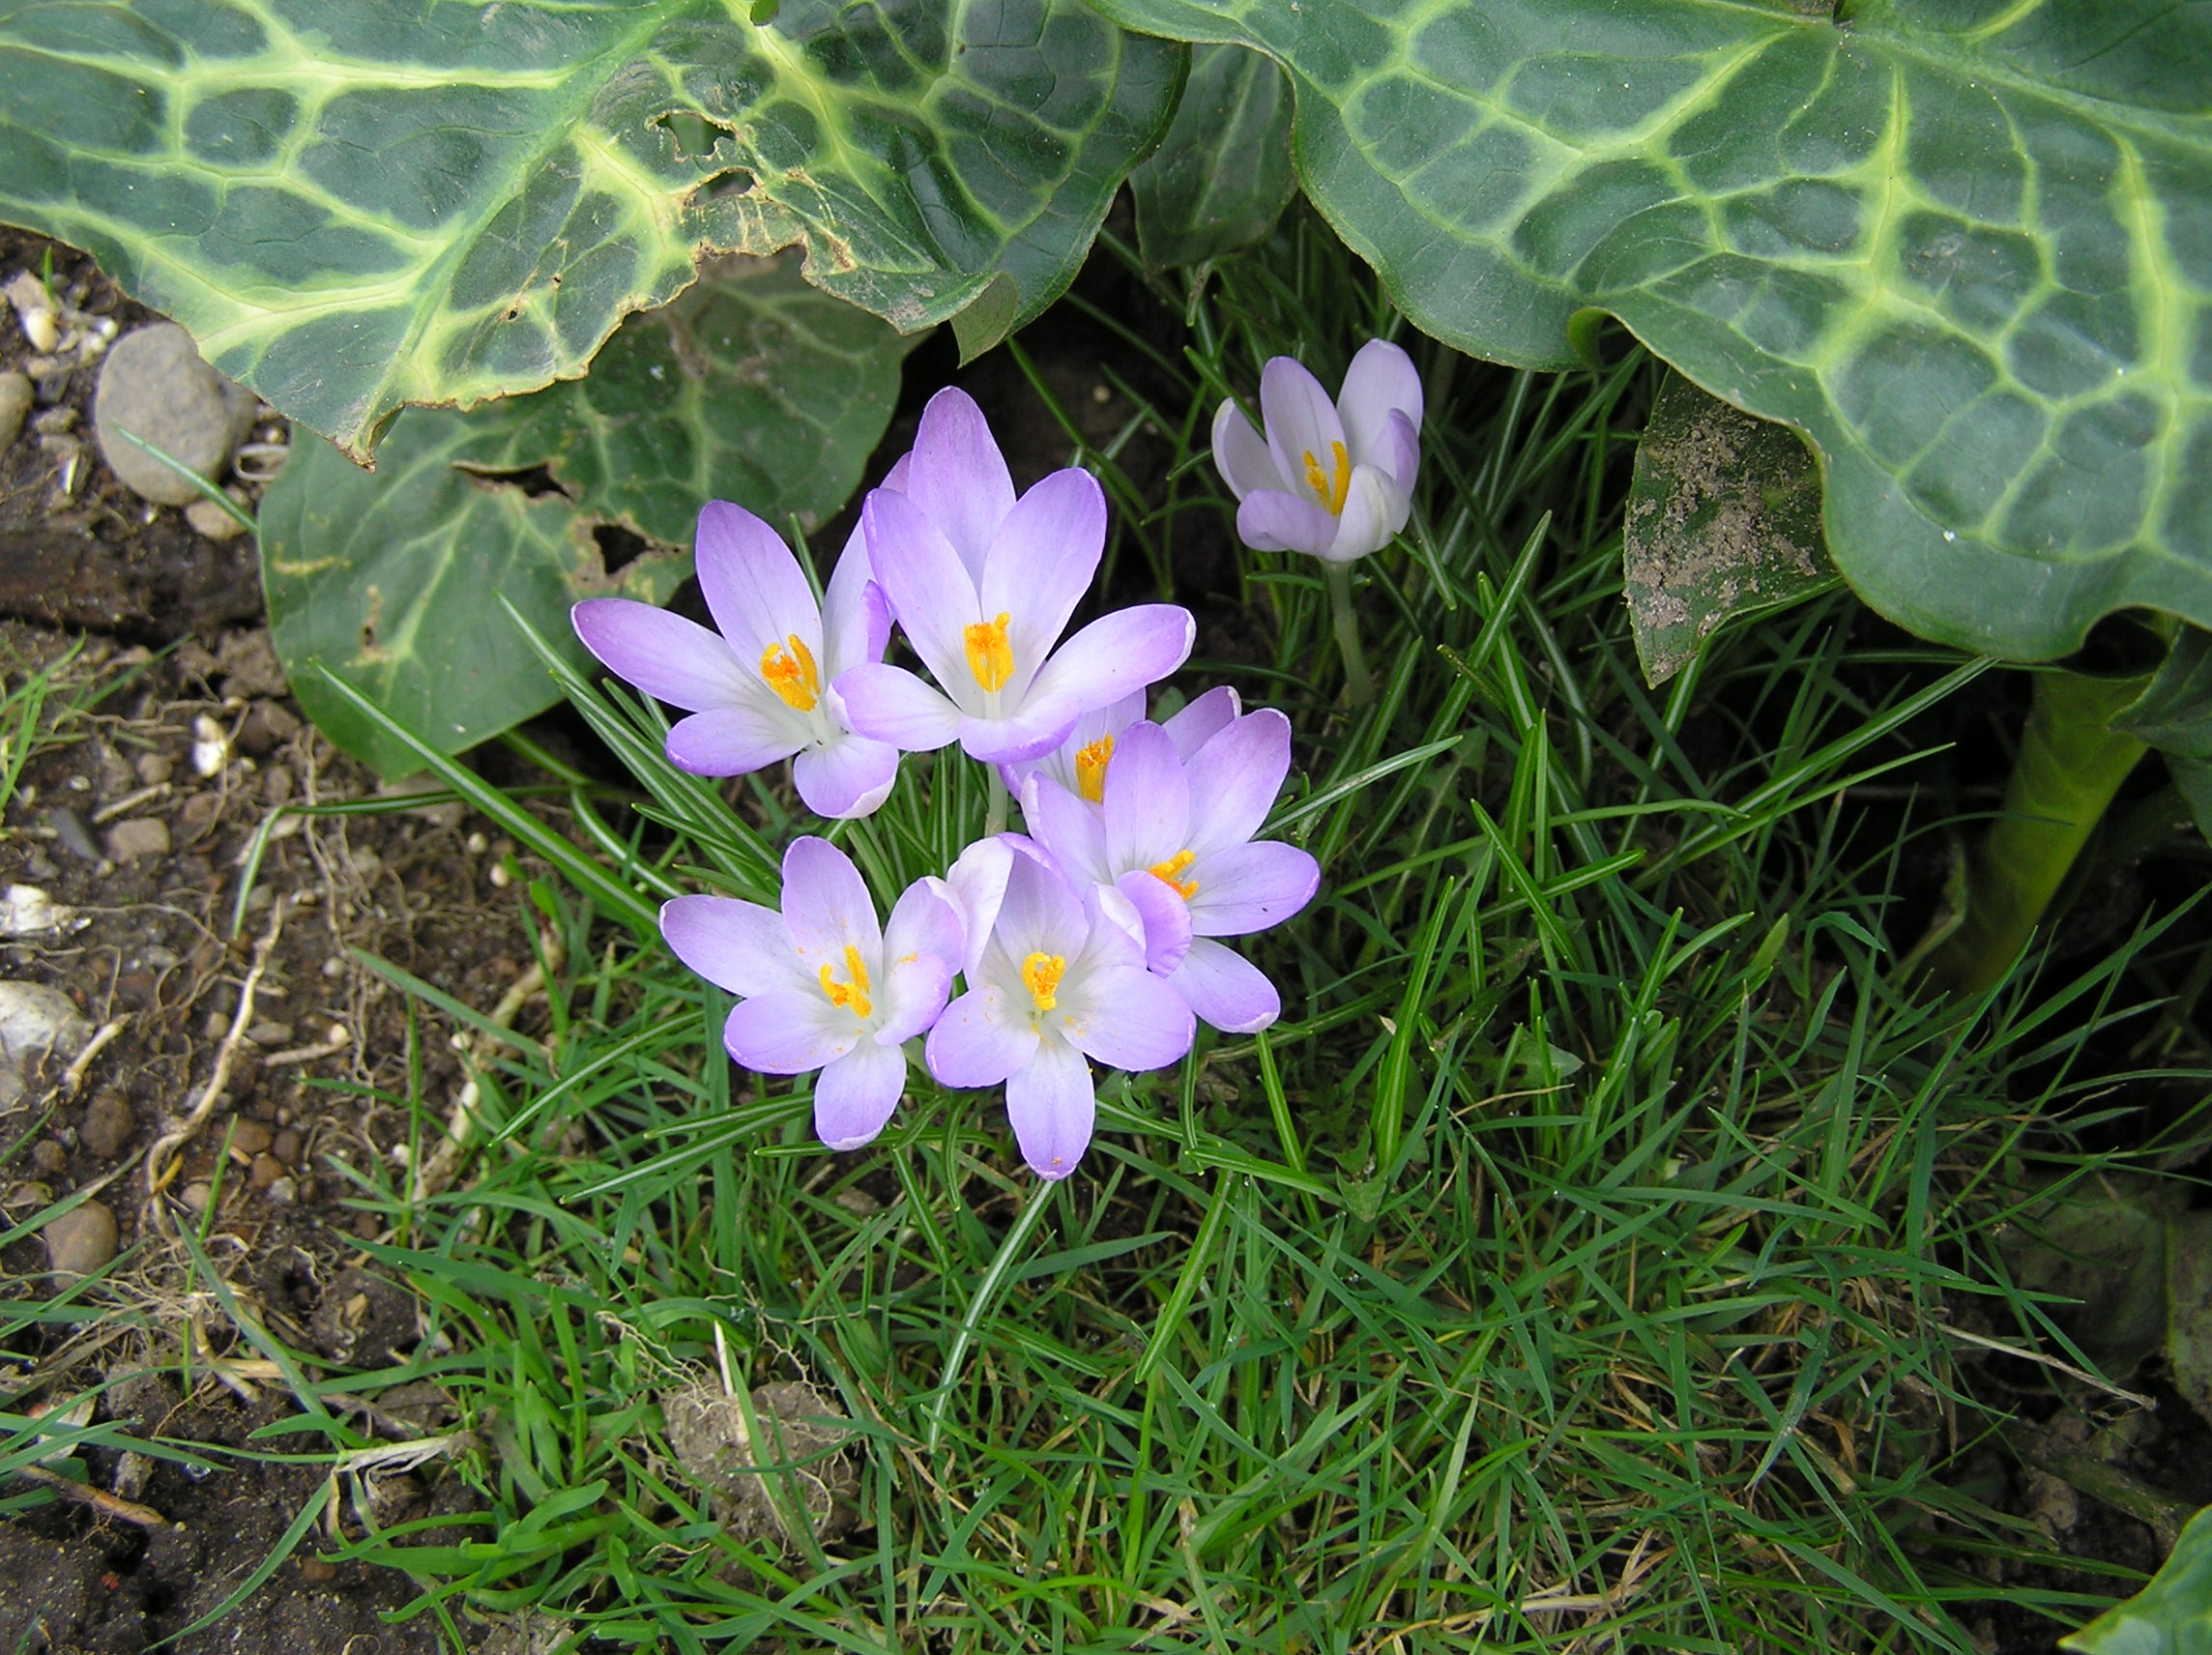 Crocuses - the miracle of spring